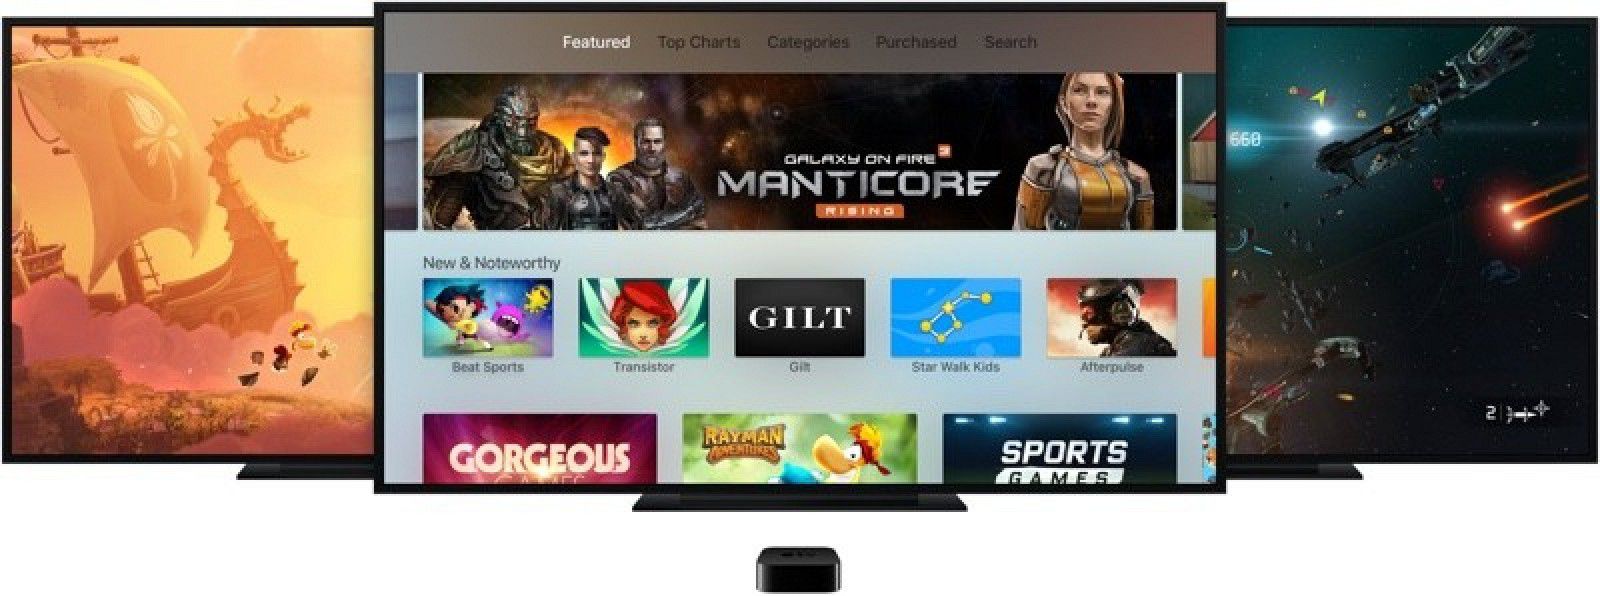 Apple executives discuss not ‘leaving money on the table’ when deciding on Apple TV subscription fees